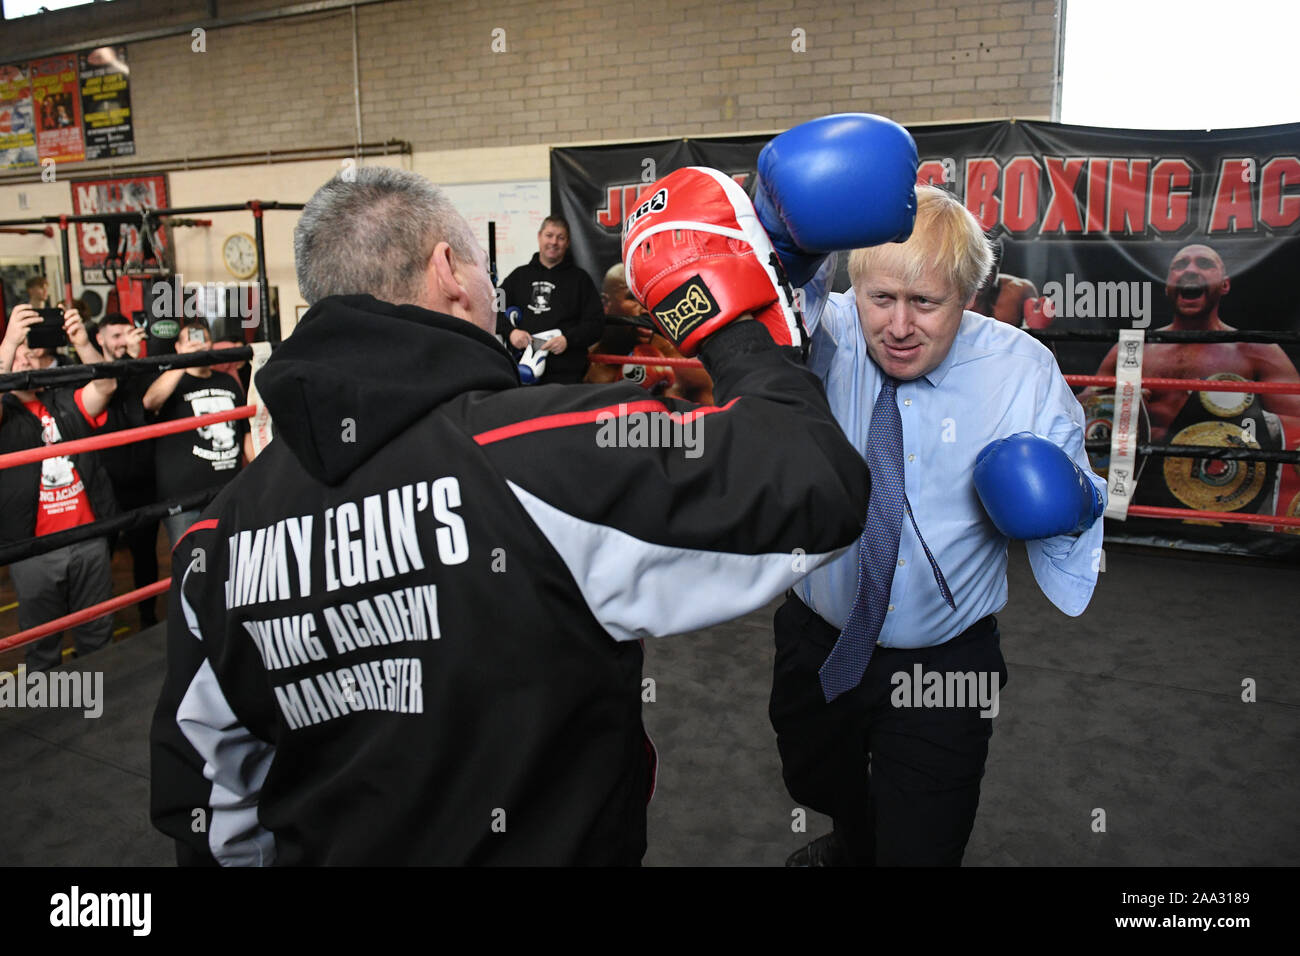 Prime Minister Boris Johnson during a visit to Jimmy Egan's Boxing Academy at Wythenshawe, while on the campaign trail ahead of the General Election. Stock Photo